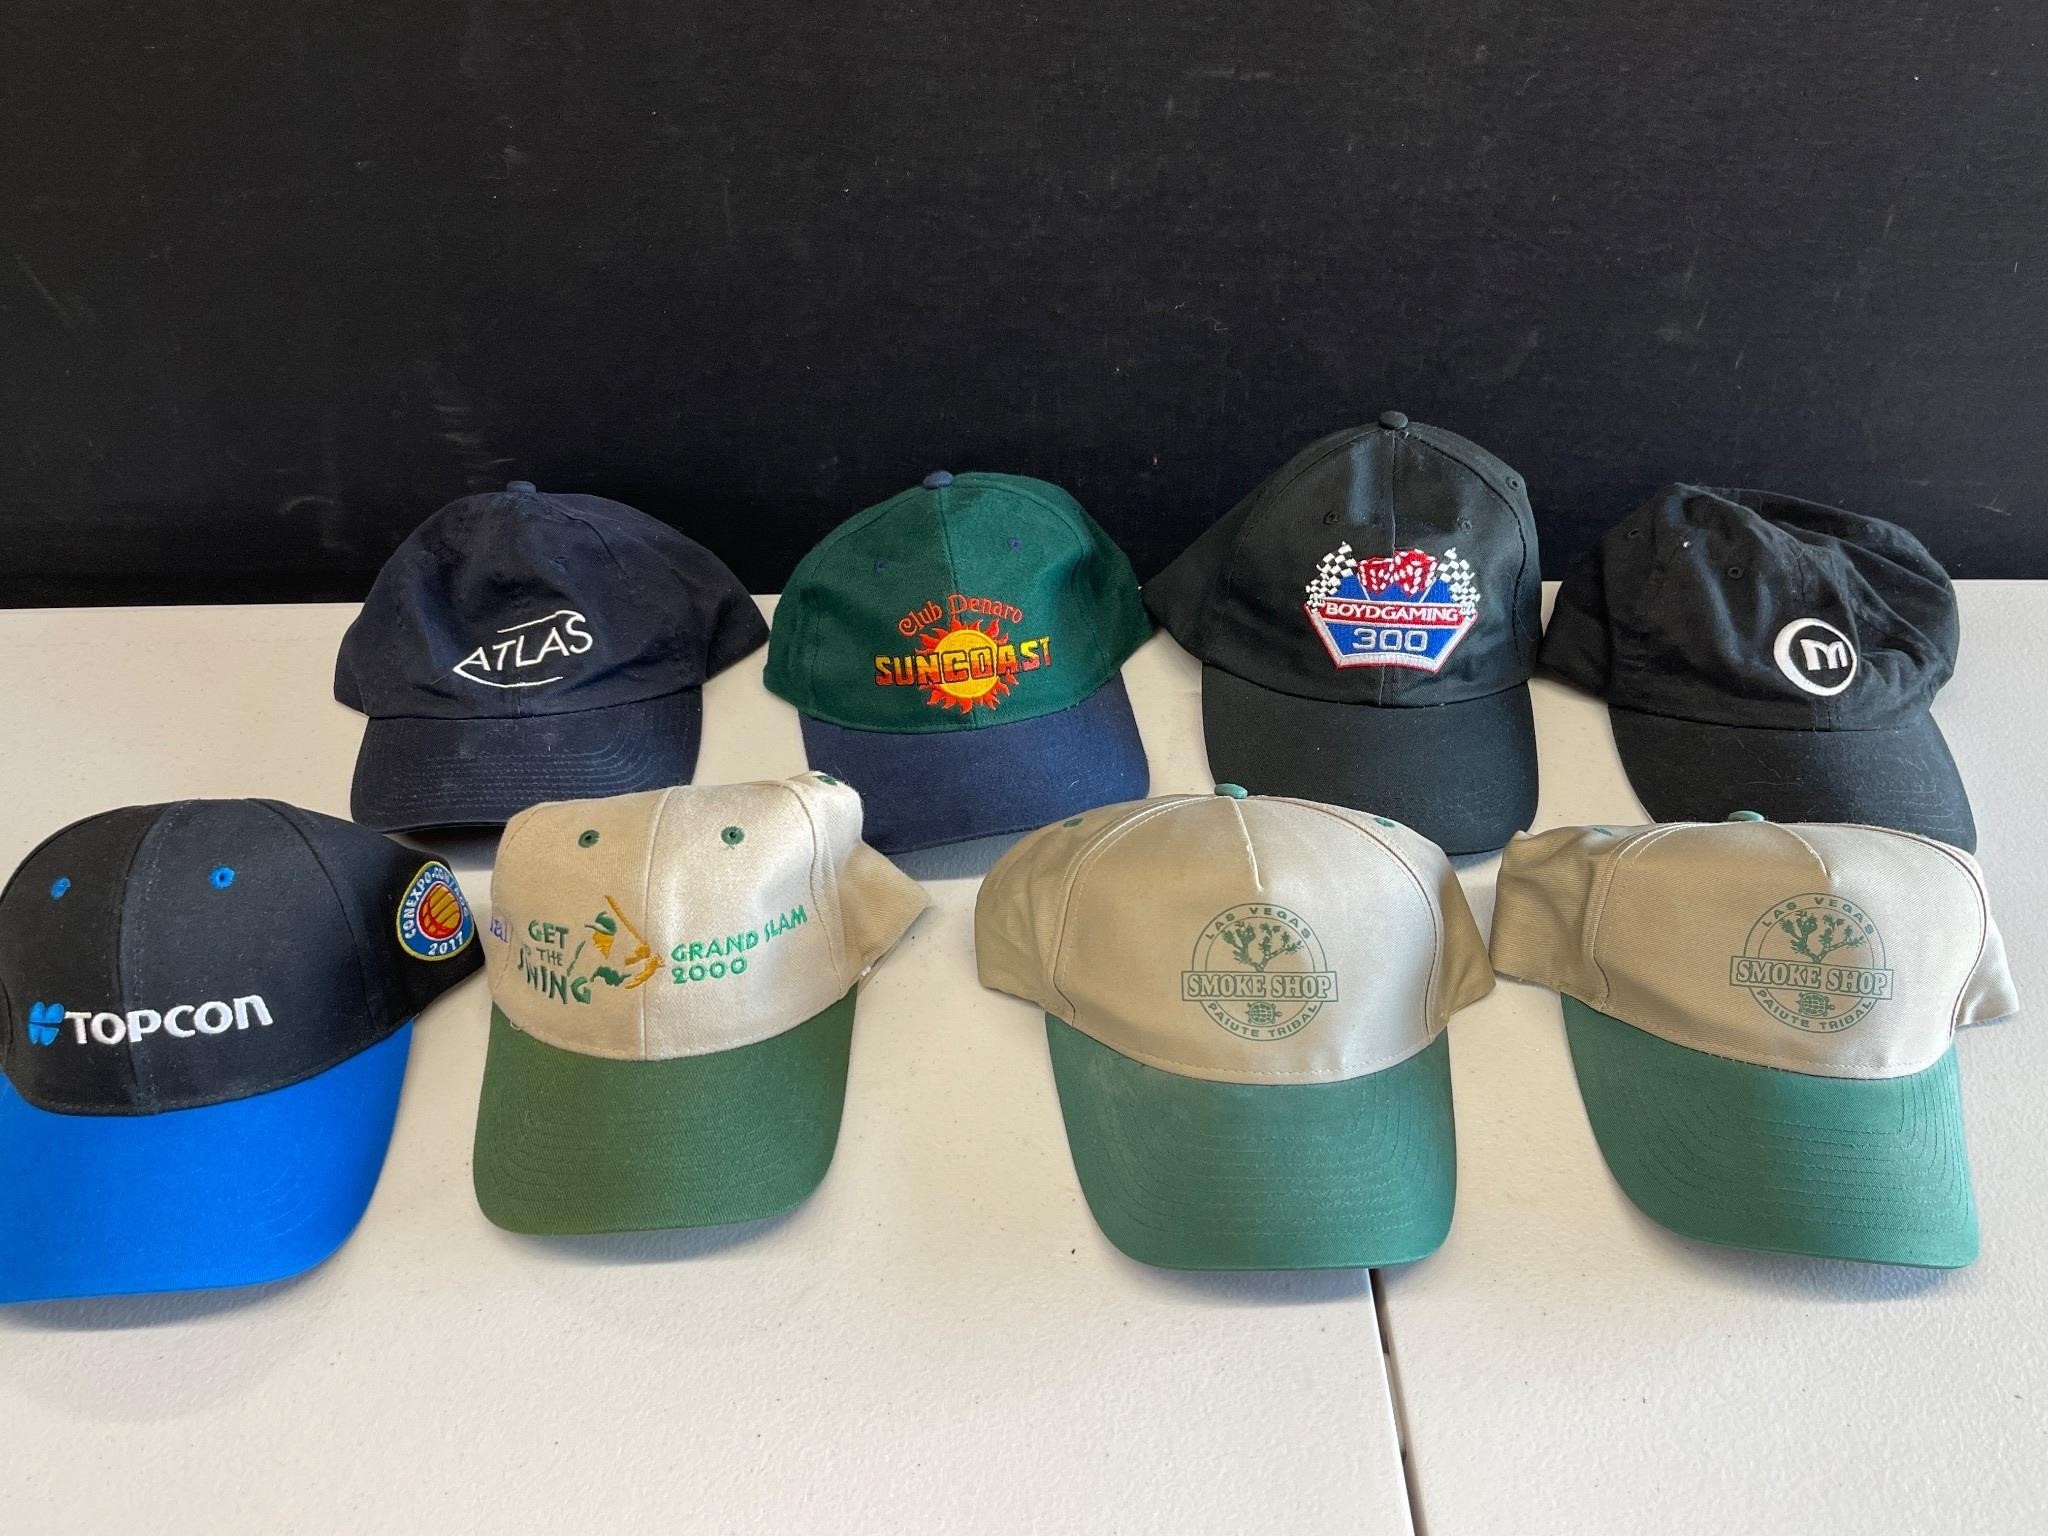 9 MISC. COLLECTABLE BALLCAPS